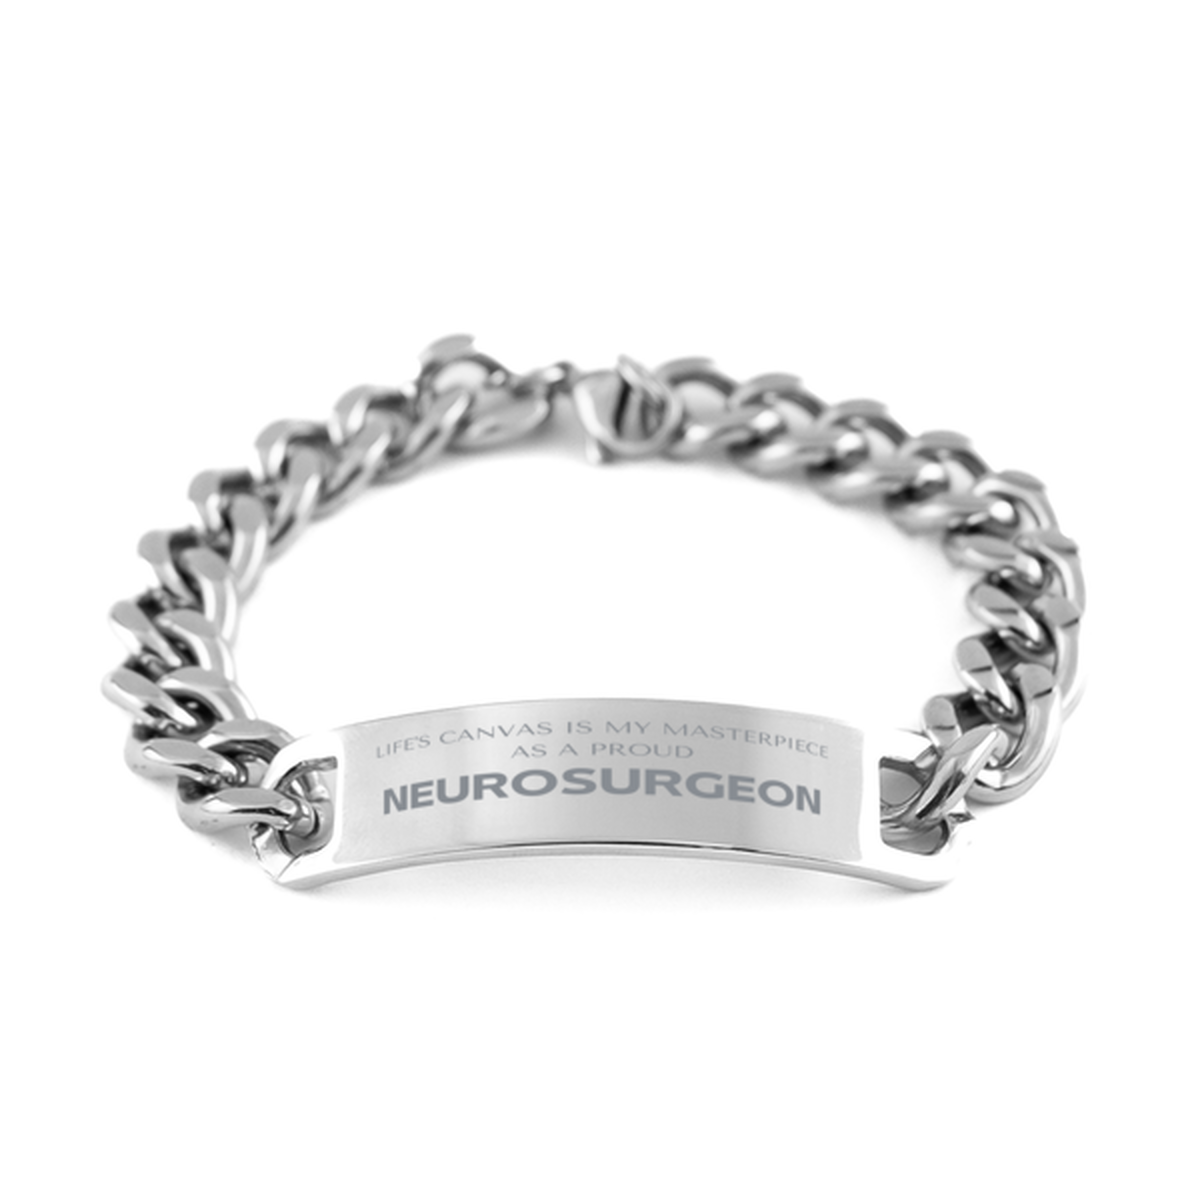 Proud Neurosurgeon Gifts, Life's canvas is my masterpiece, Epic Birthday Christmas Unique Cuban Chain Stainless Steel Bracelet For Neurosurgeon, Coworkers, Men, Women, Friends